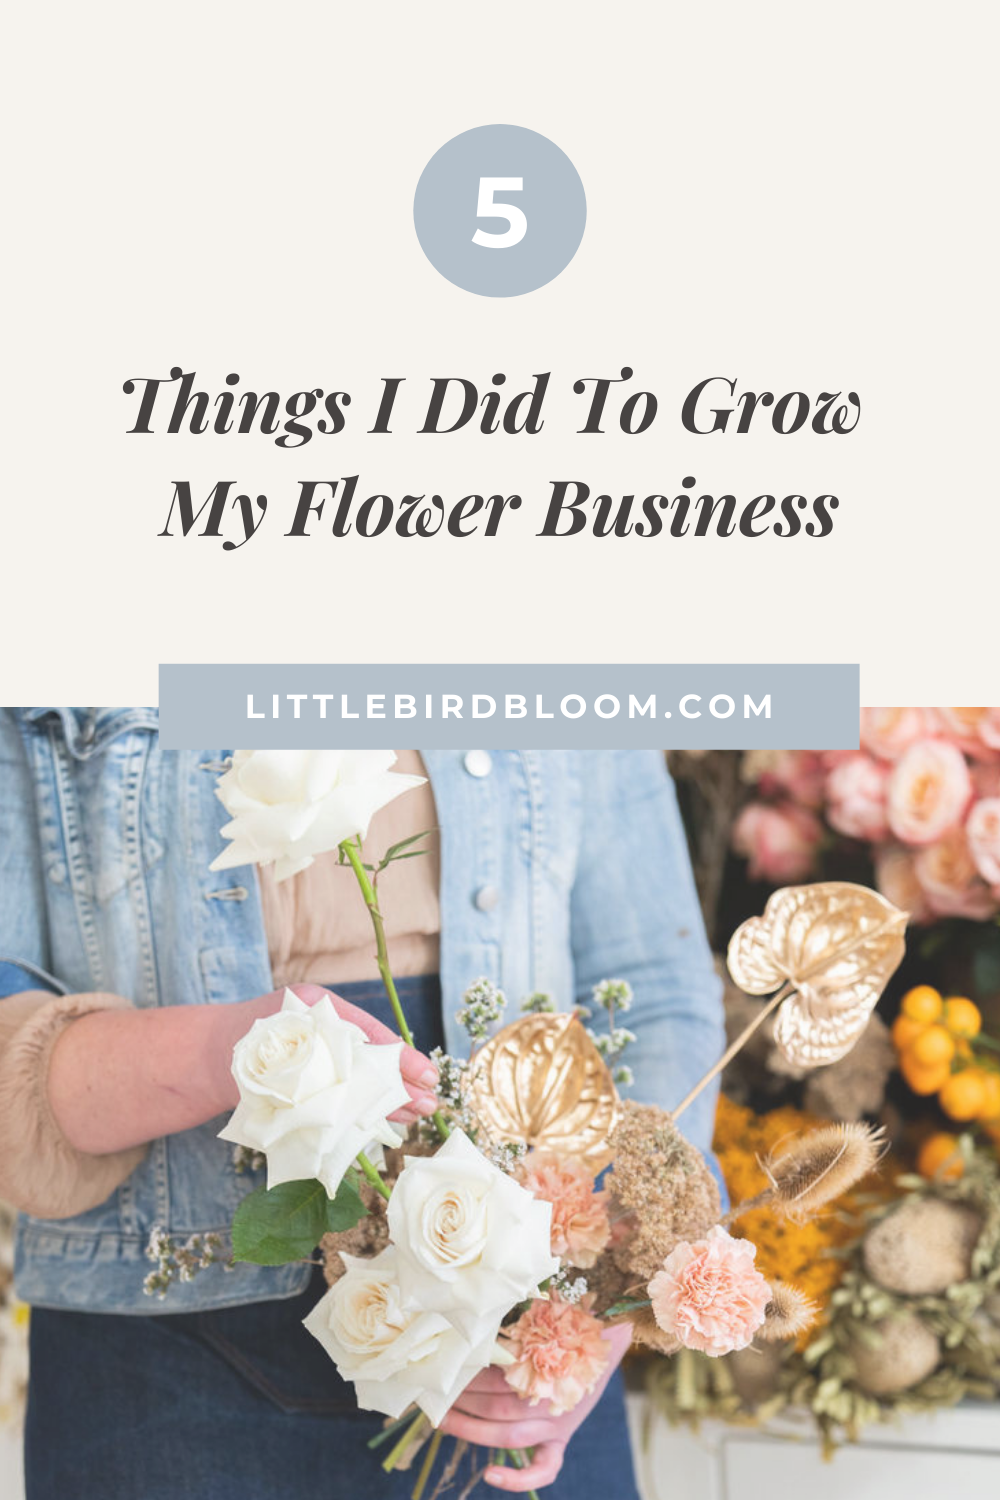 5 things I did to grow my flower business